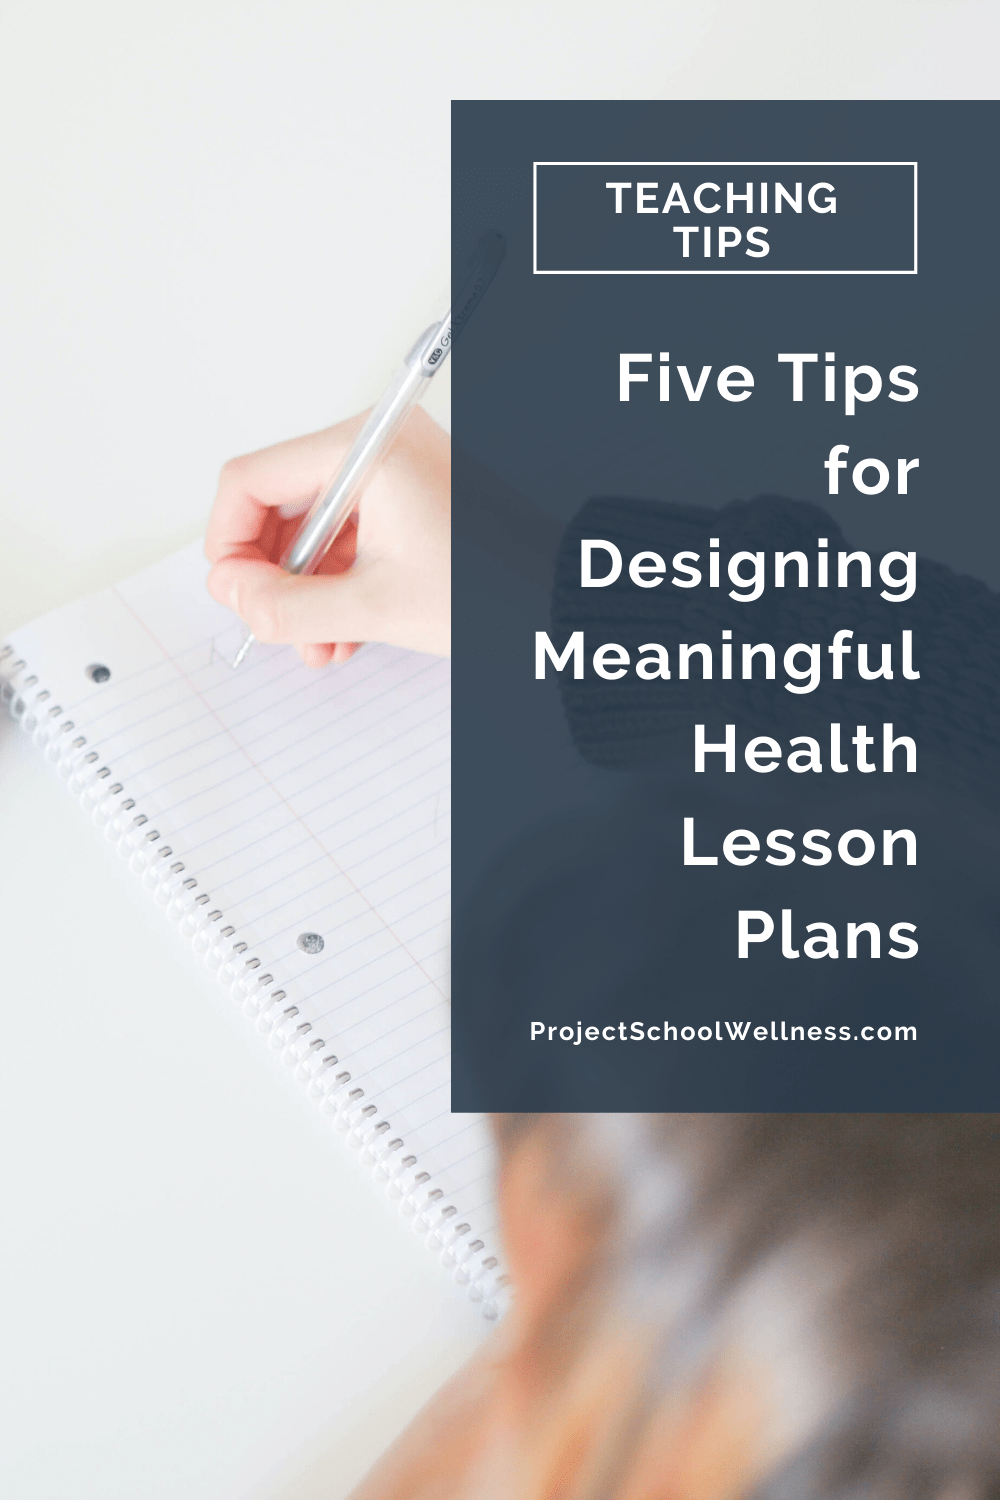 Health Teaching Tips - Five Tips for Designing Meaningful Health lesson Plans - Tips from Janelle of Project School Wellness